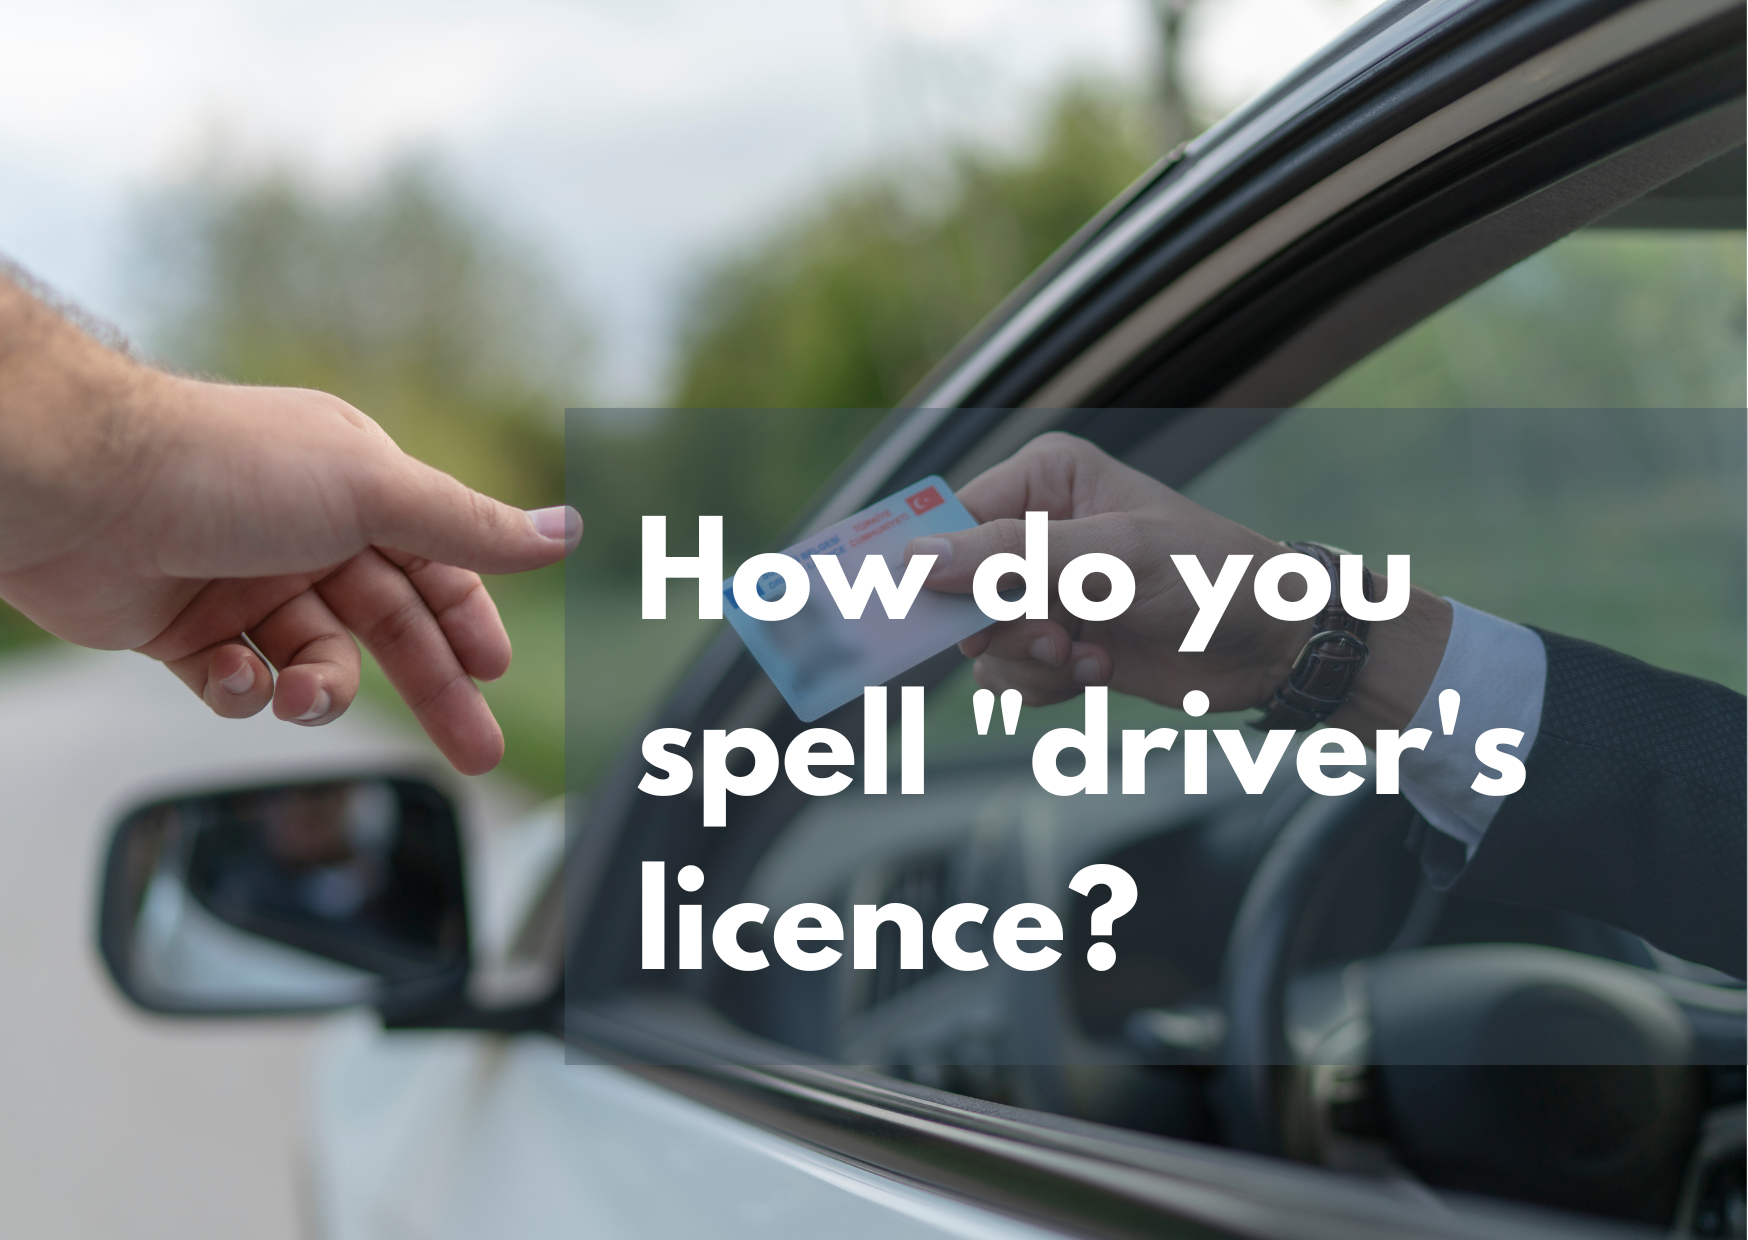 A picture of a car window with the driver's hand handing over a driver's licence, with the words: "How do you spell 'driver's licence?'"